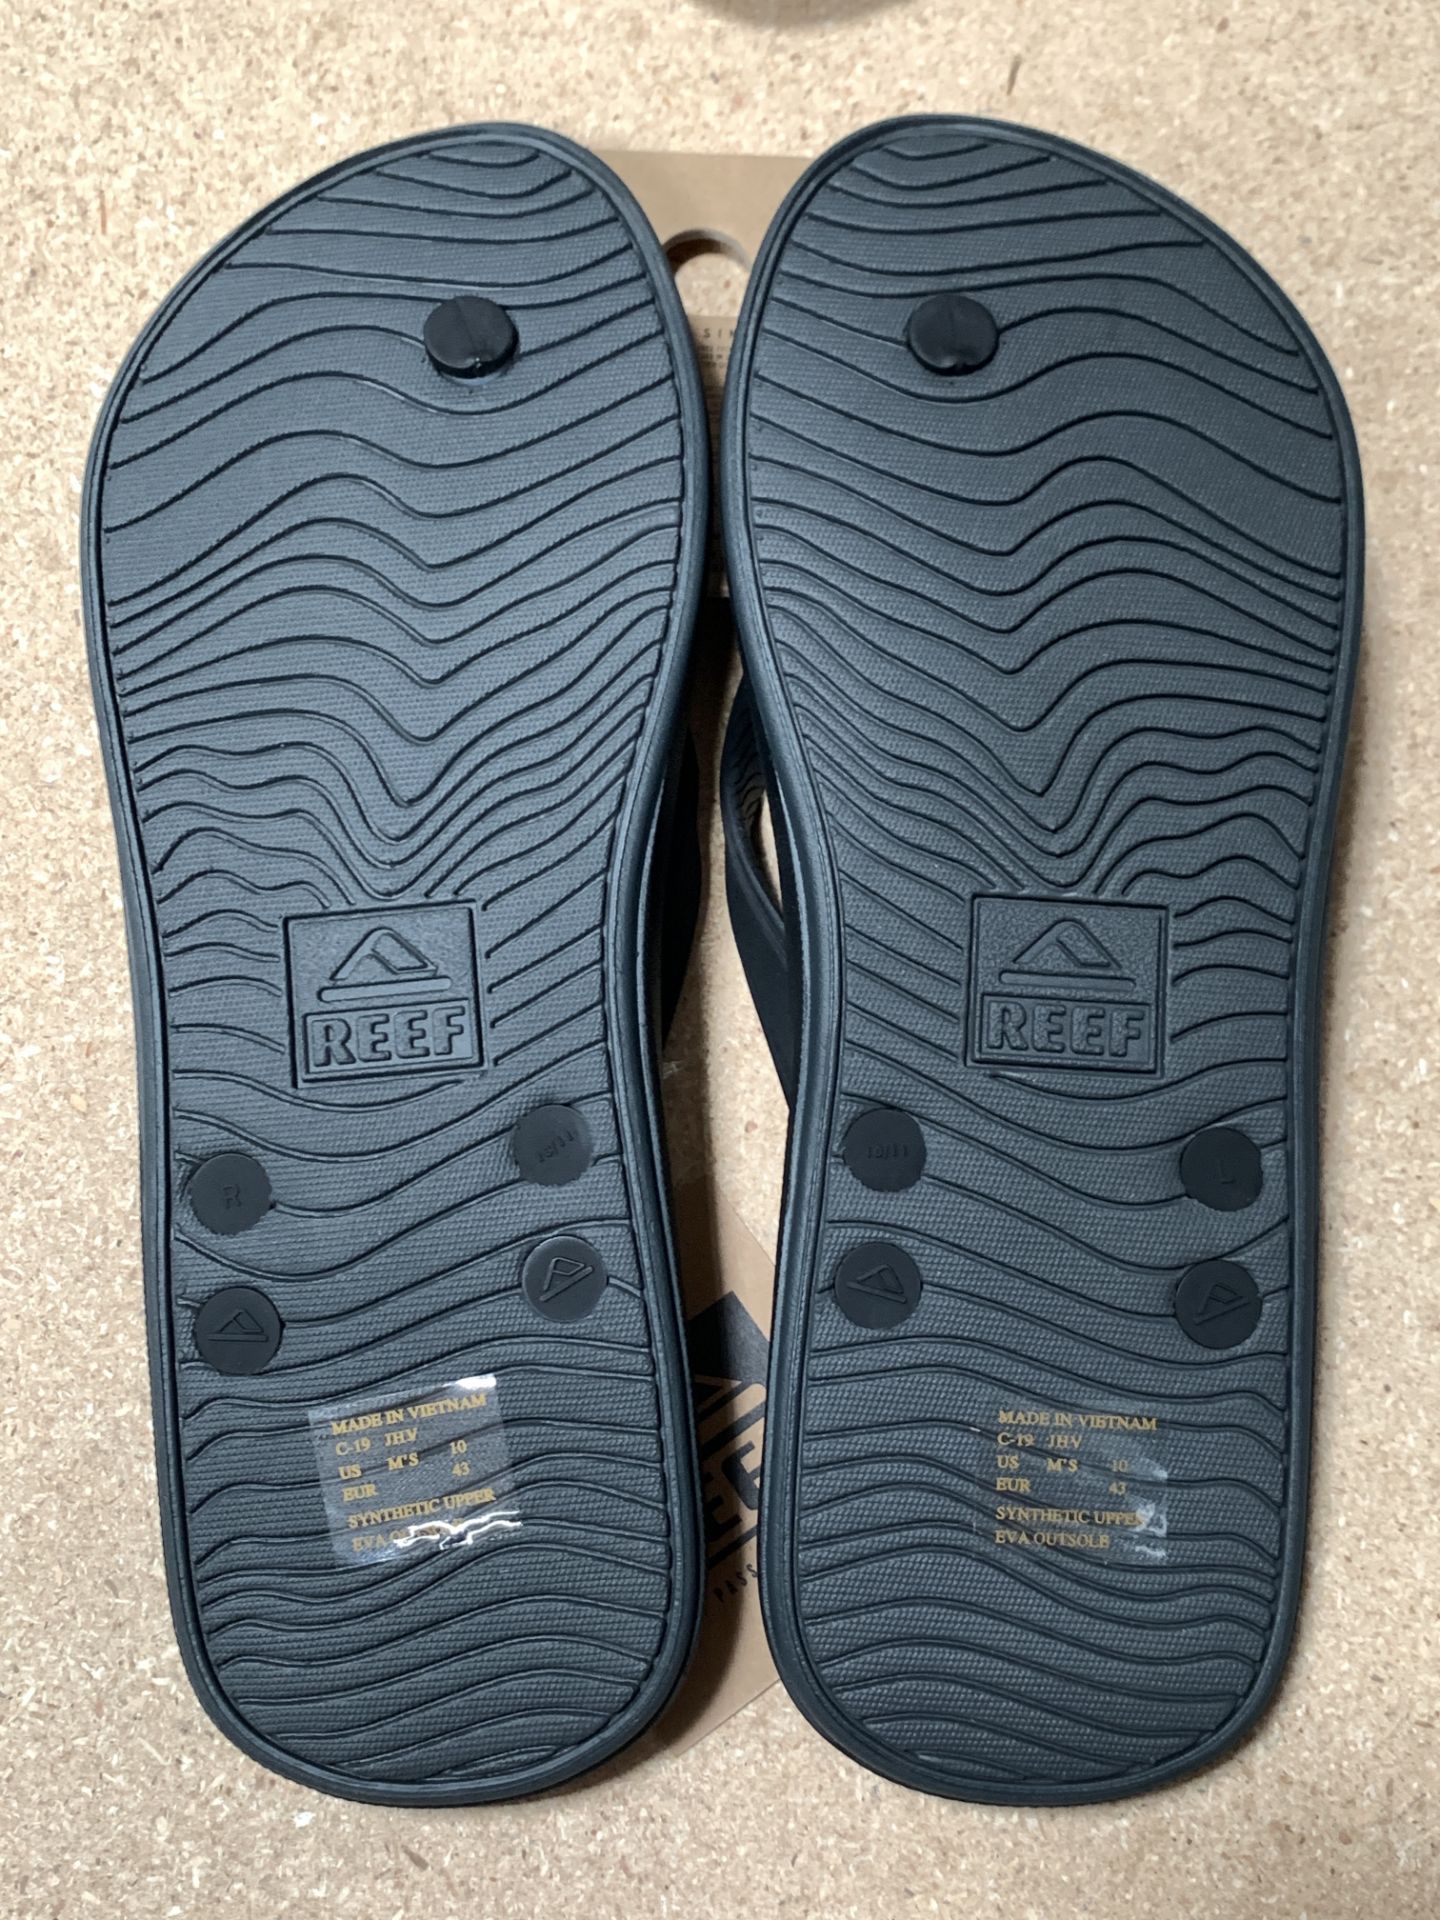 9 Pairs REEF Flip Flop Sandals, Men's, New w. Tags, Various styles and sizes, (Retail $399) - Image 8 of 8